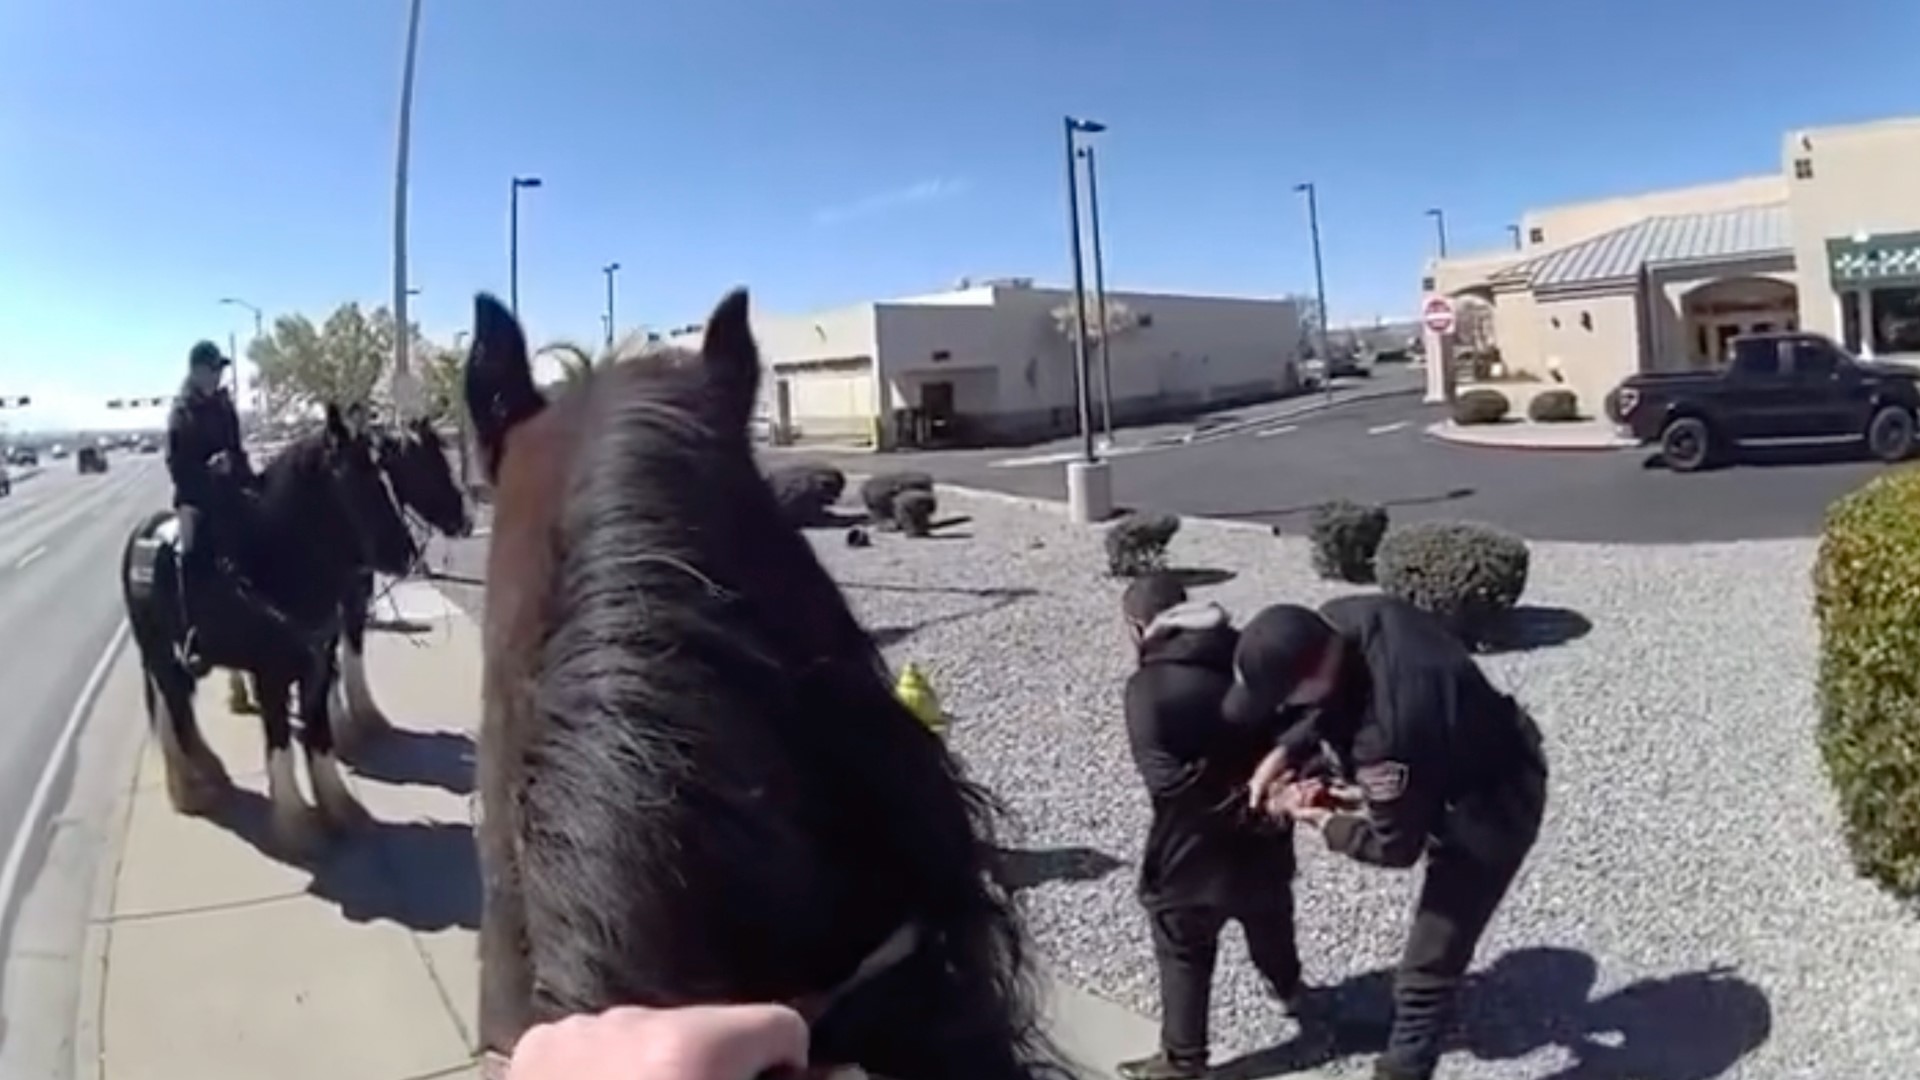 Albuquerque police bodycam video shows a dark-brown horse trotting through a parking lot behind a man in black clothing.